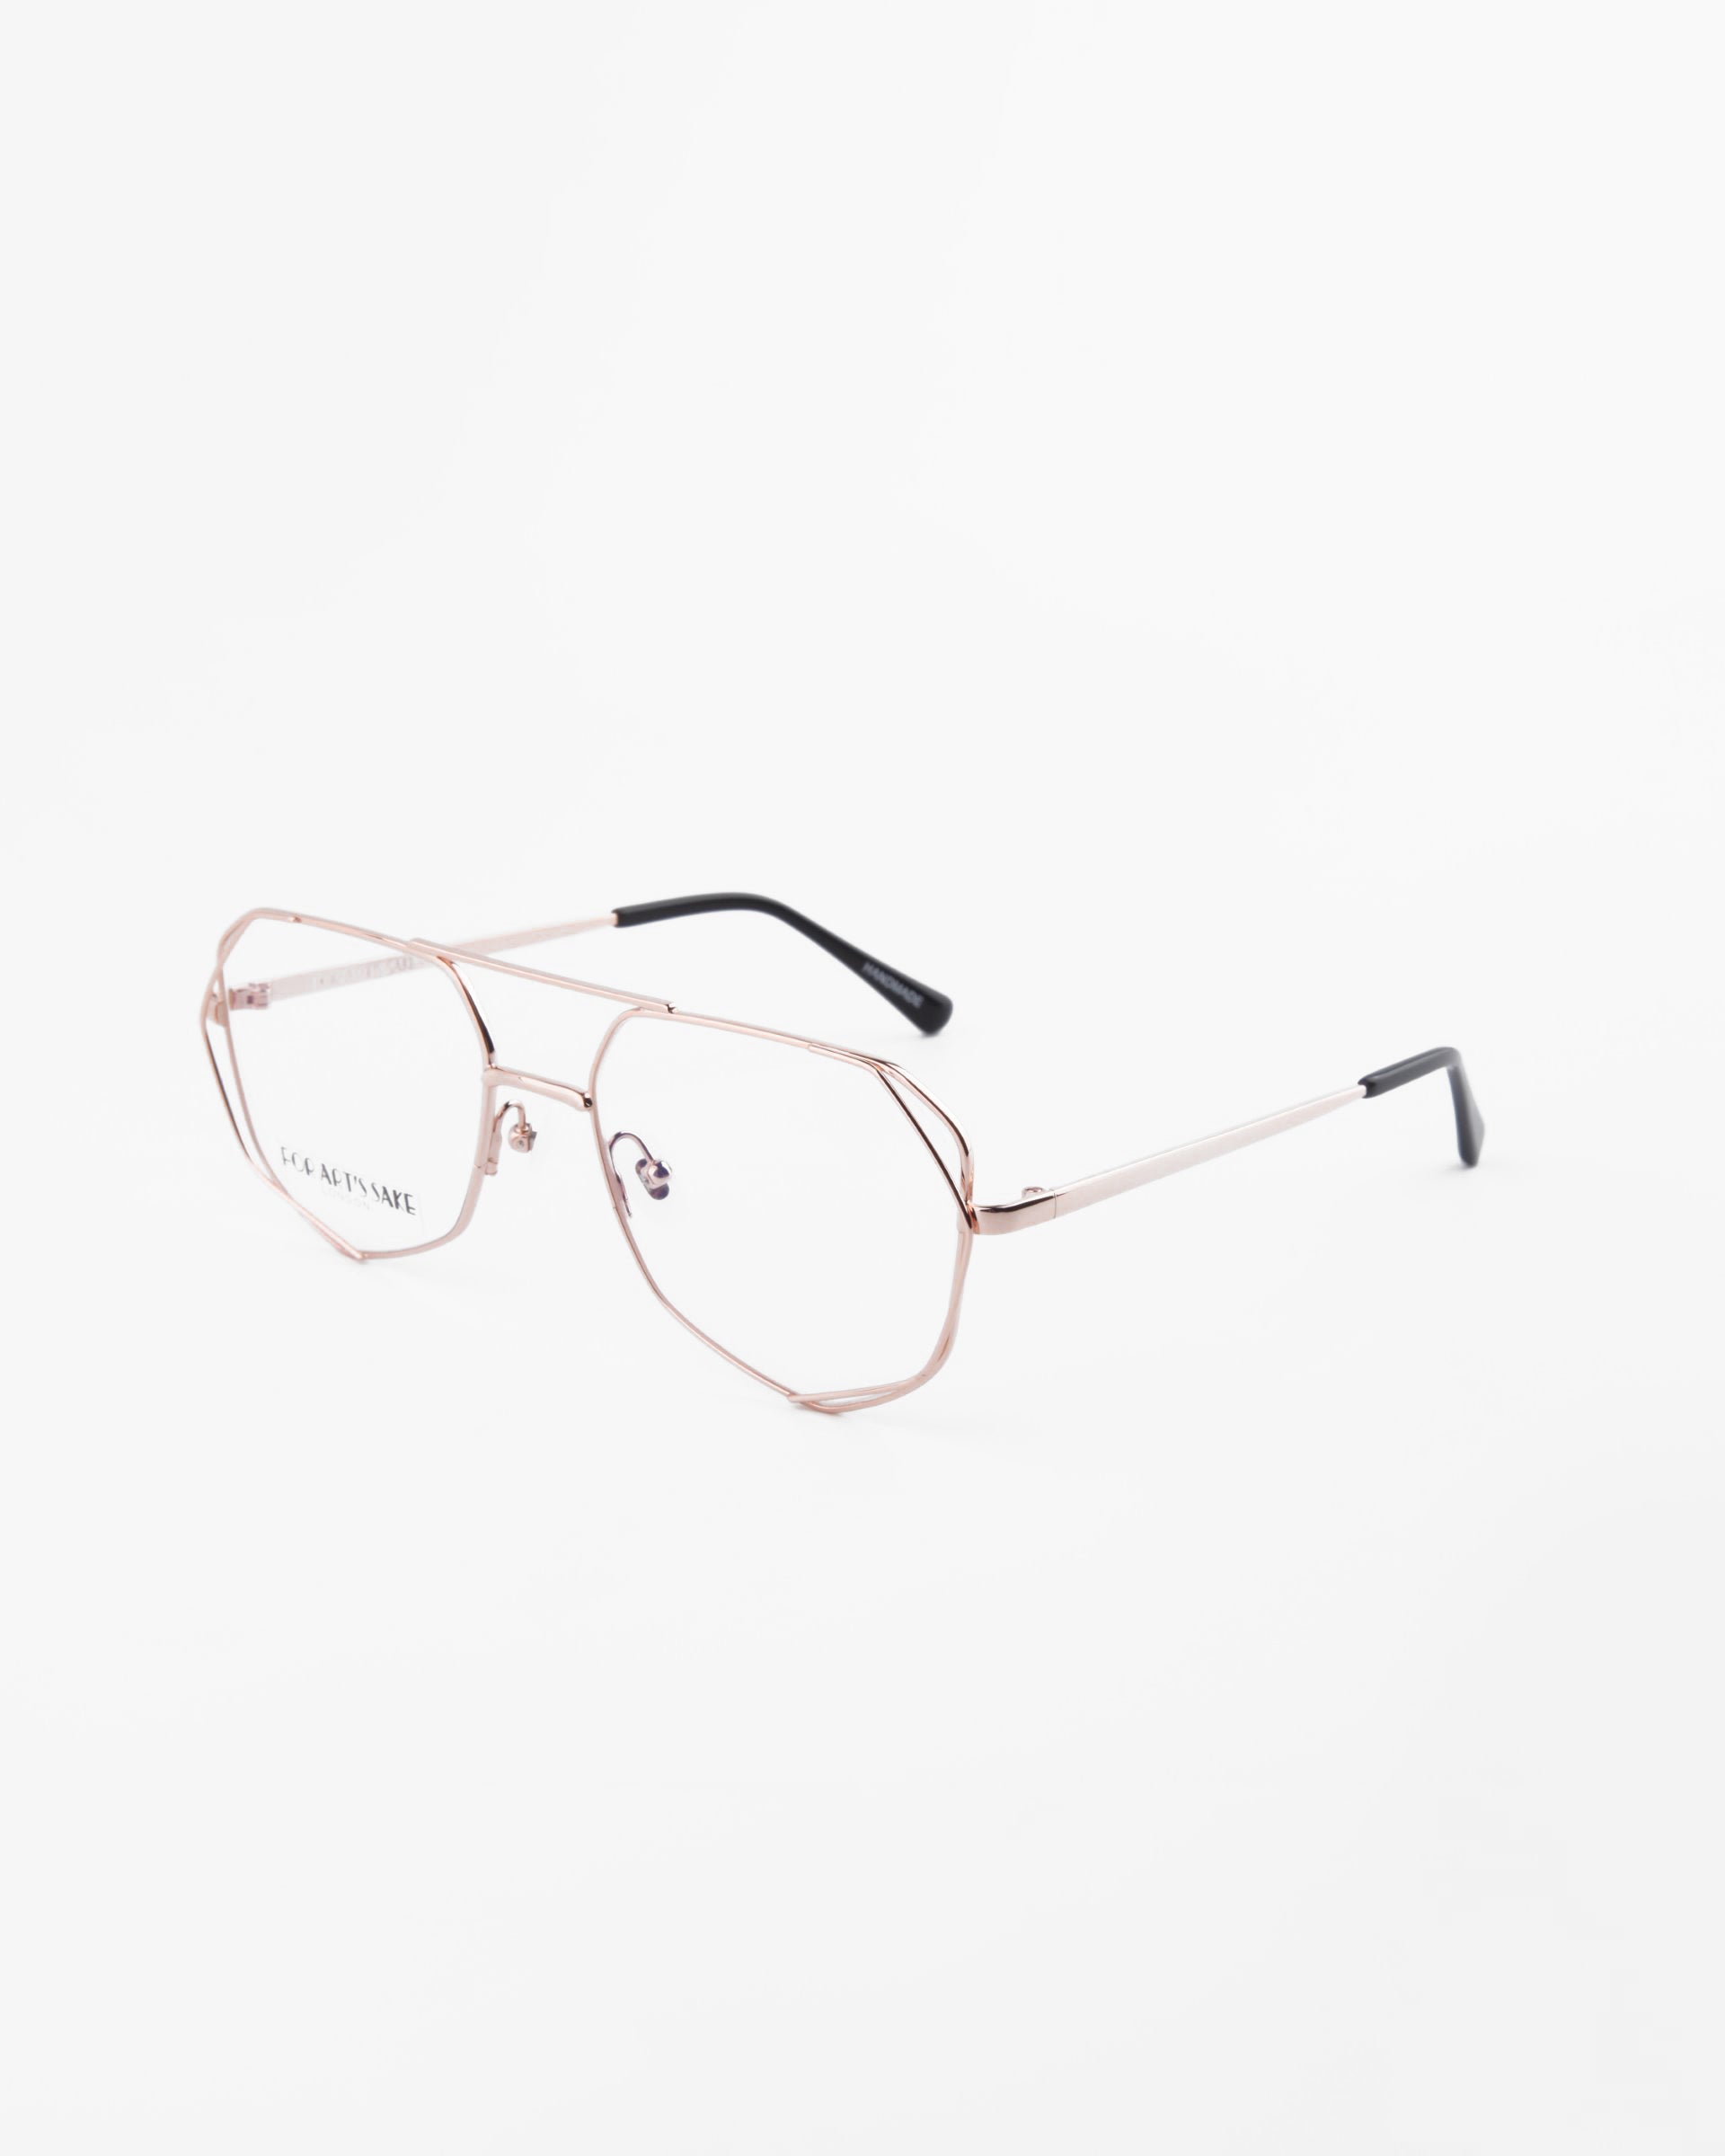 A pair of Genius Two metal-frame eyeglasses by For Art&#39;s Sake® with clear lenses featuring blue light filter technology. The frames are thin and gold-colored with black temple tips. The eyeglasses are photographed at a three-quarter angle on a white background.